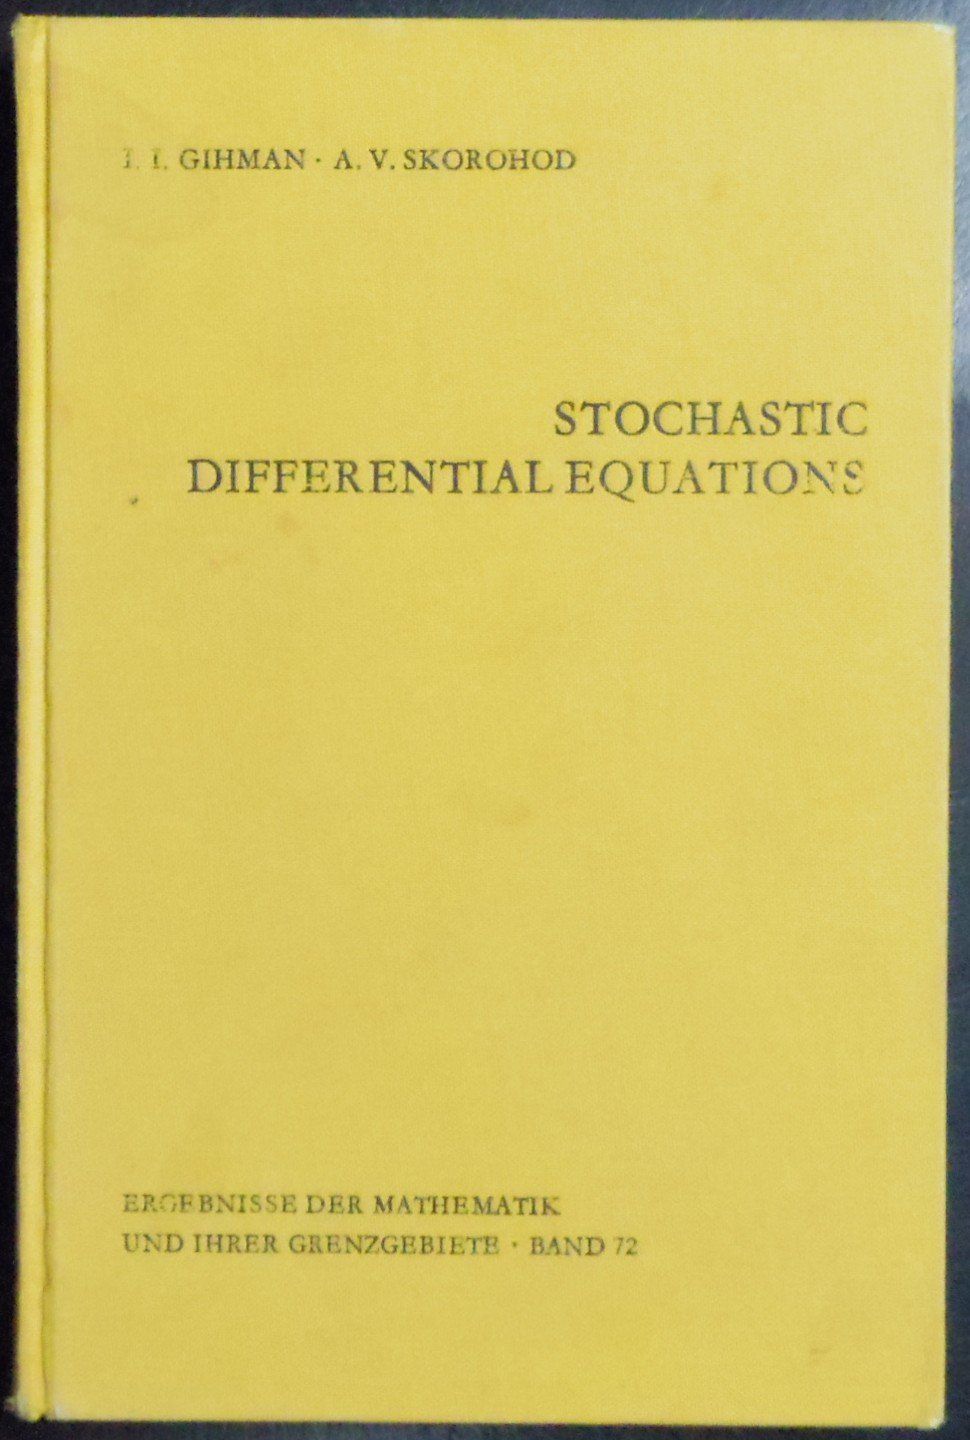 Stochastic differential equations magazine reviews